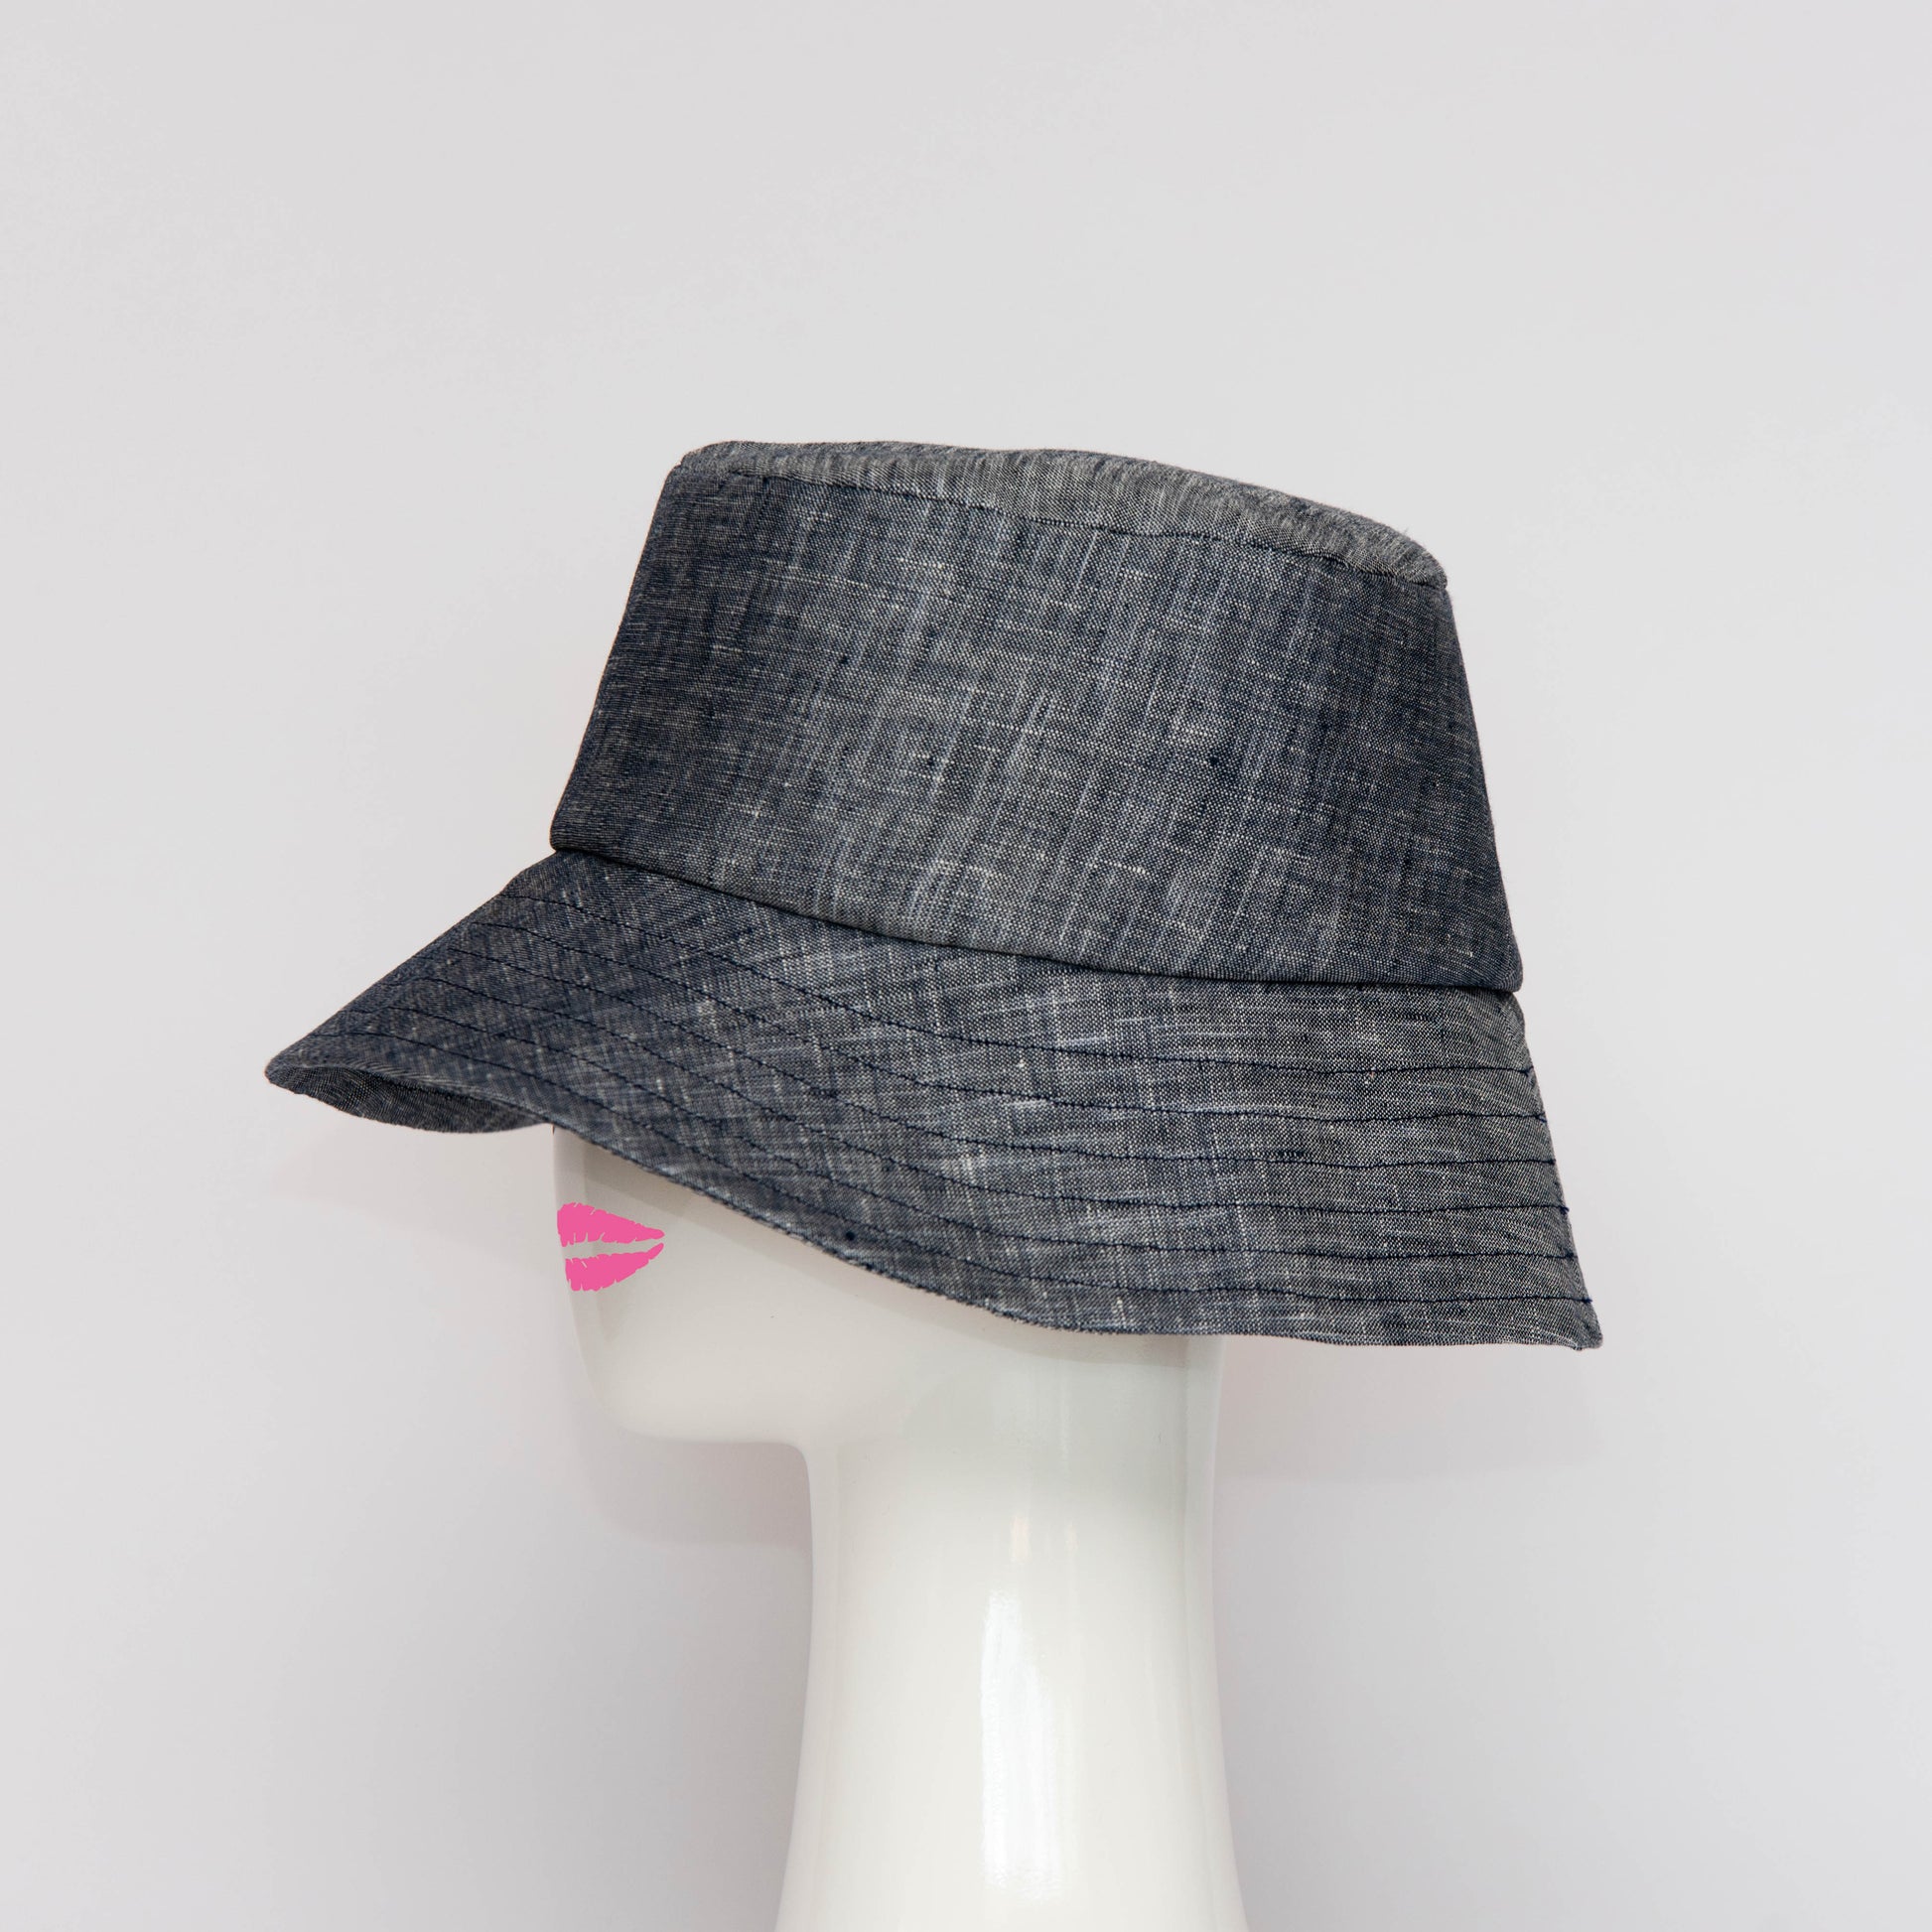 A side view of the Appin Bucket Hat in cotton denim has a square shape crown with tip and side band.  Created by Melbourne based Lauren J Ritchie Millinery.